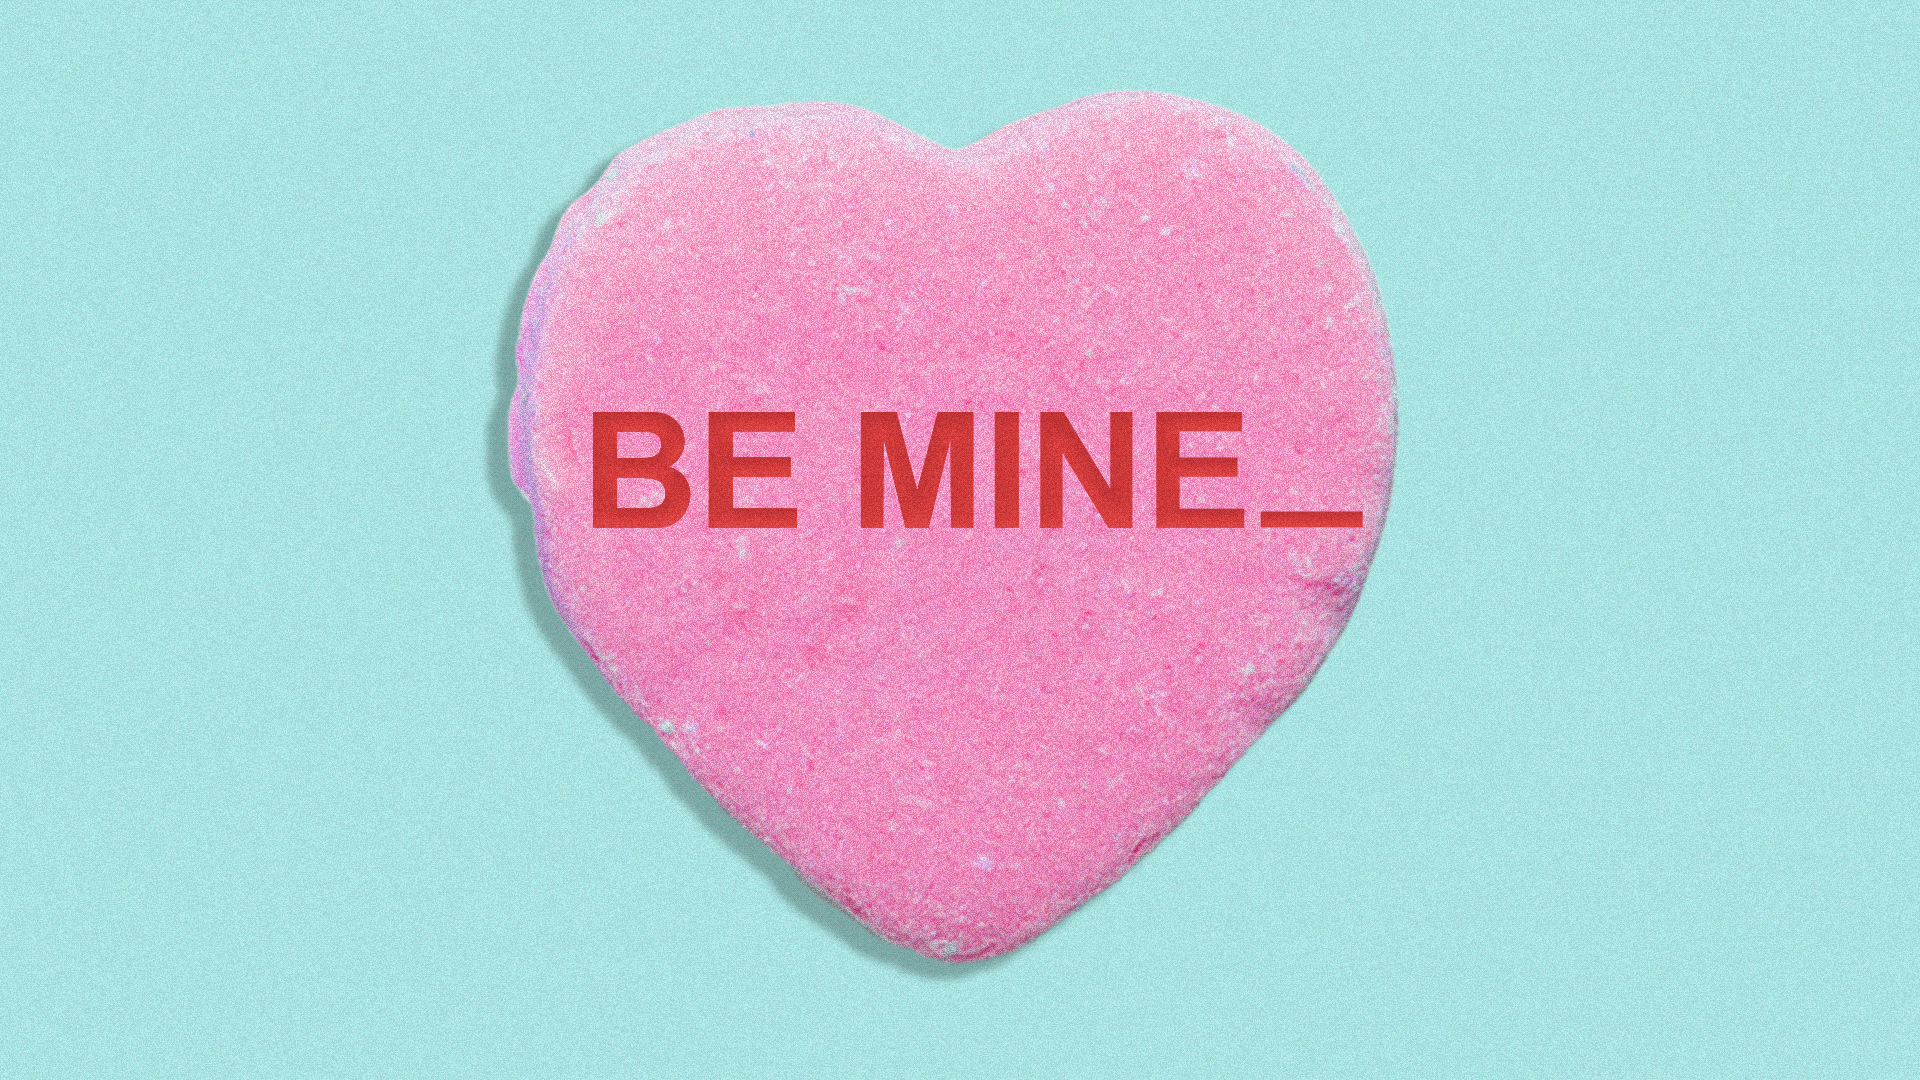 Illustration of a candy heart with the words “Be Mine” getting deleted.